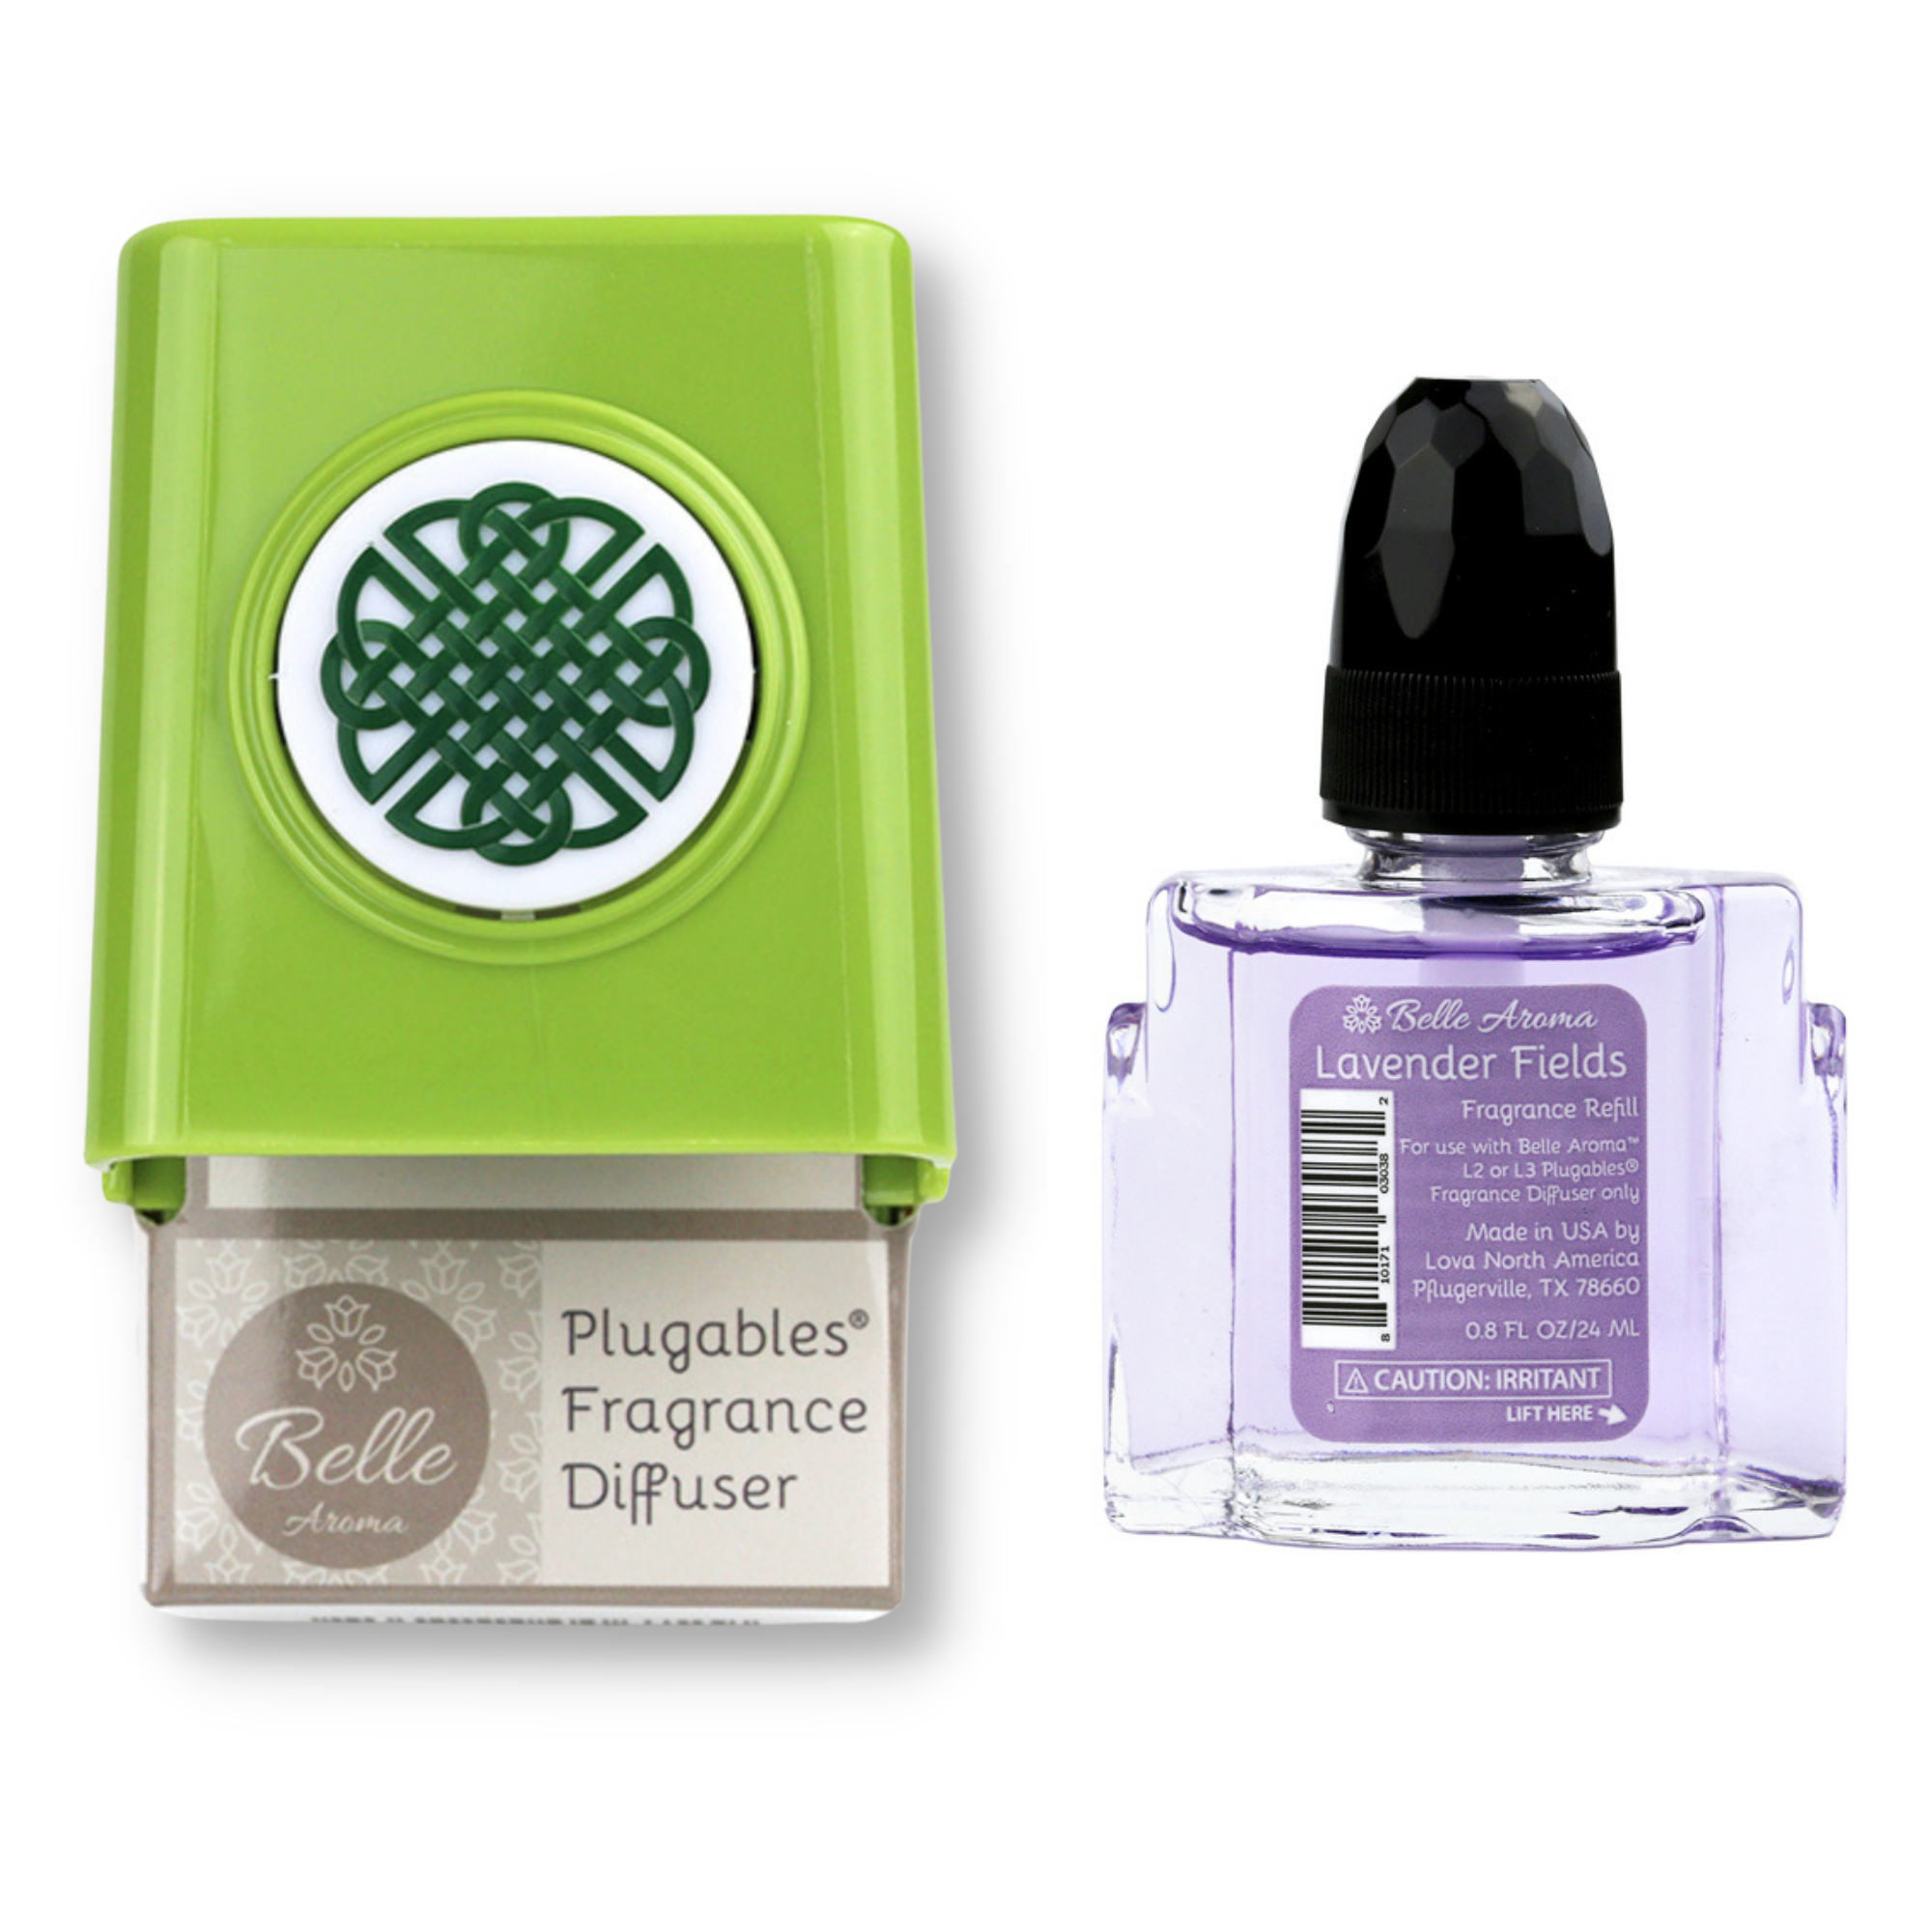 Celtic Knot Medallion Plugables® Plugin Aromalectric® Scented Oil Diffuser - Granny Smith with Lavender Fields Fragrance Oil Home Fragrance Accessories